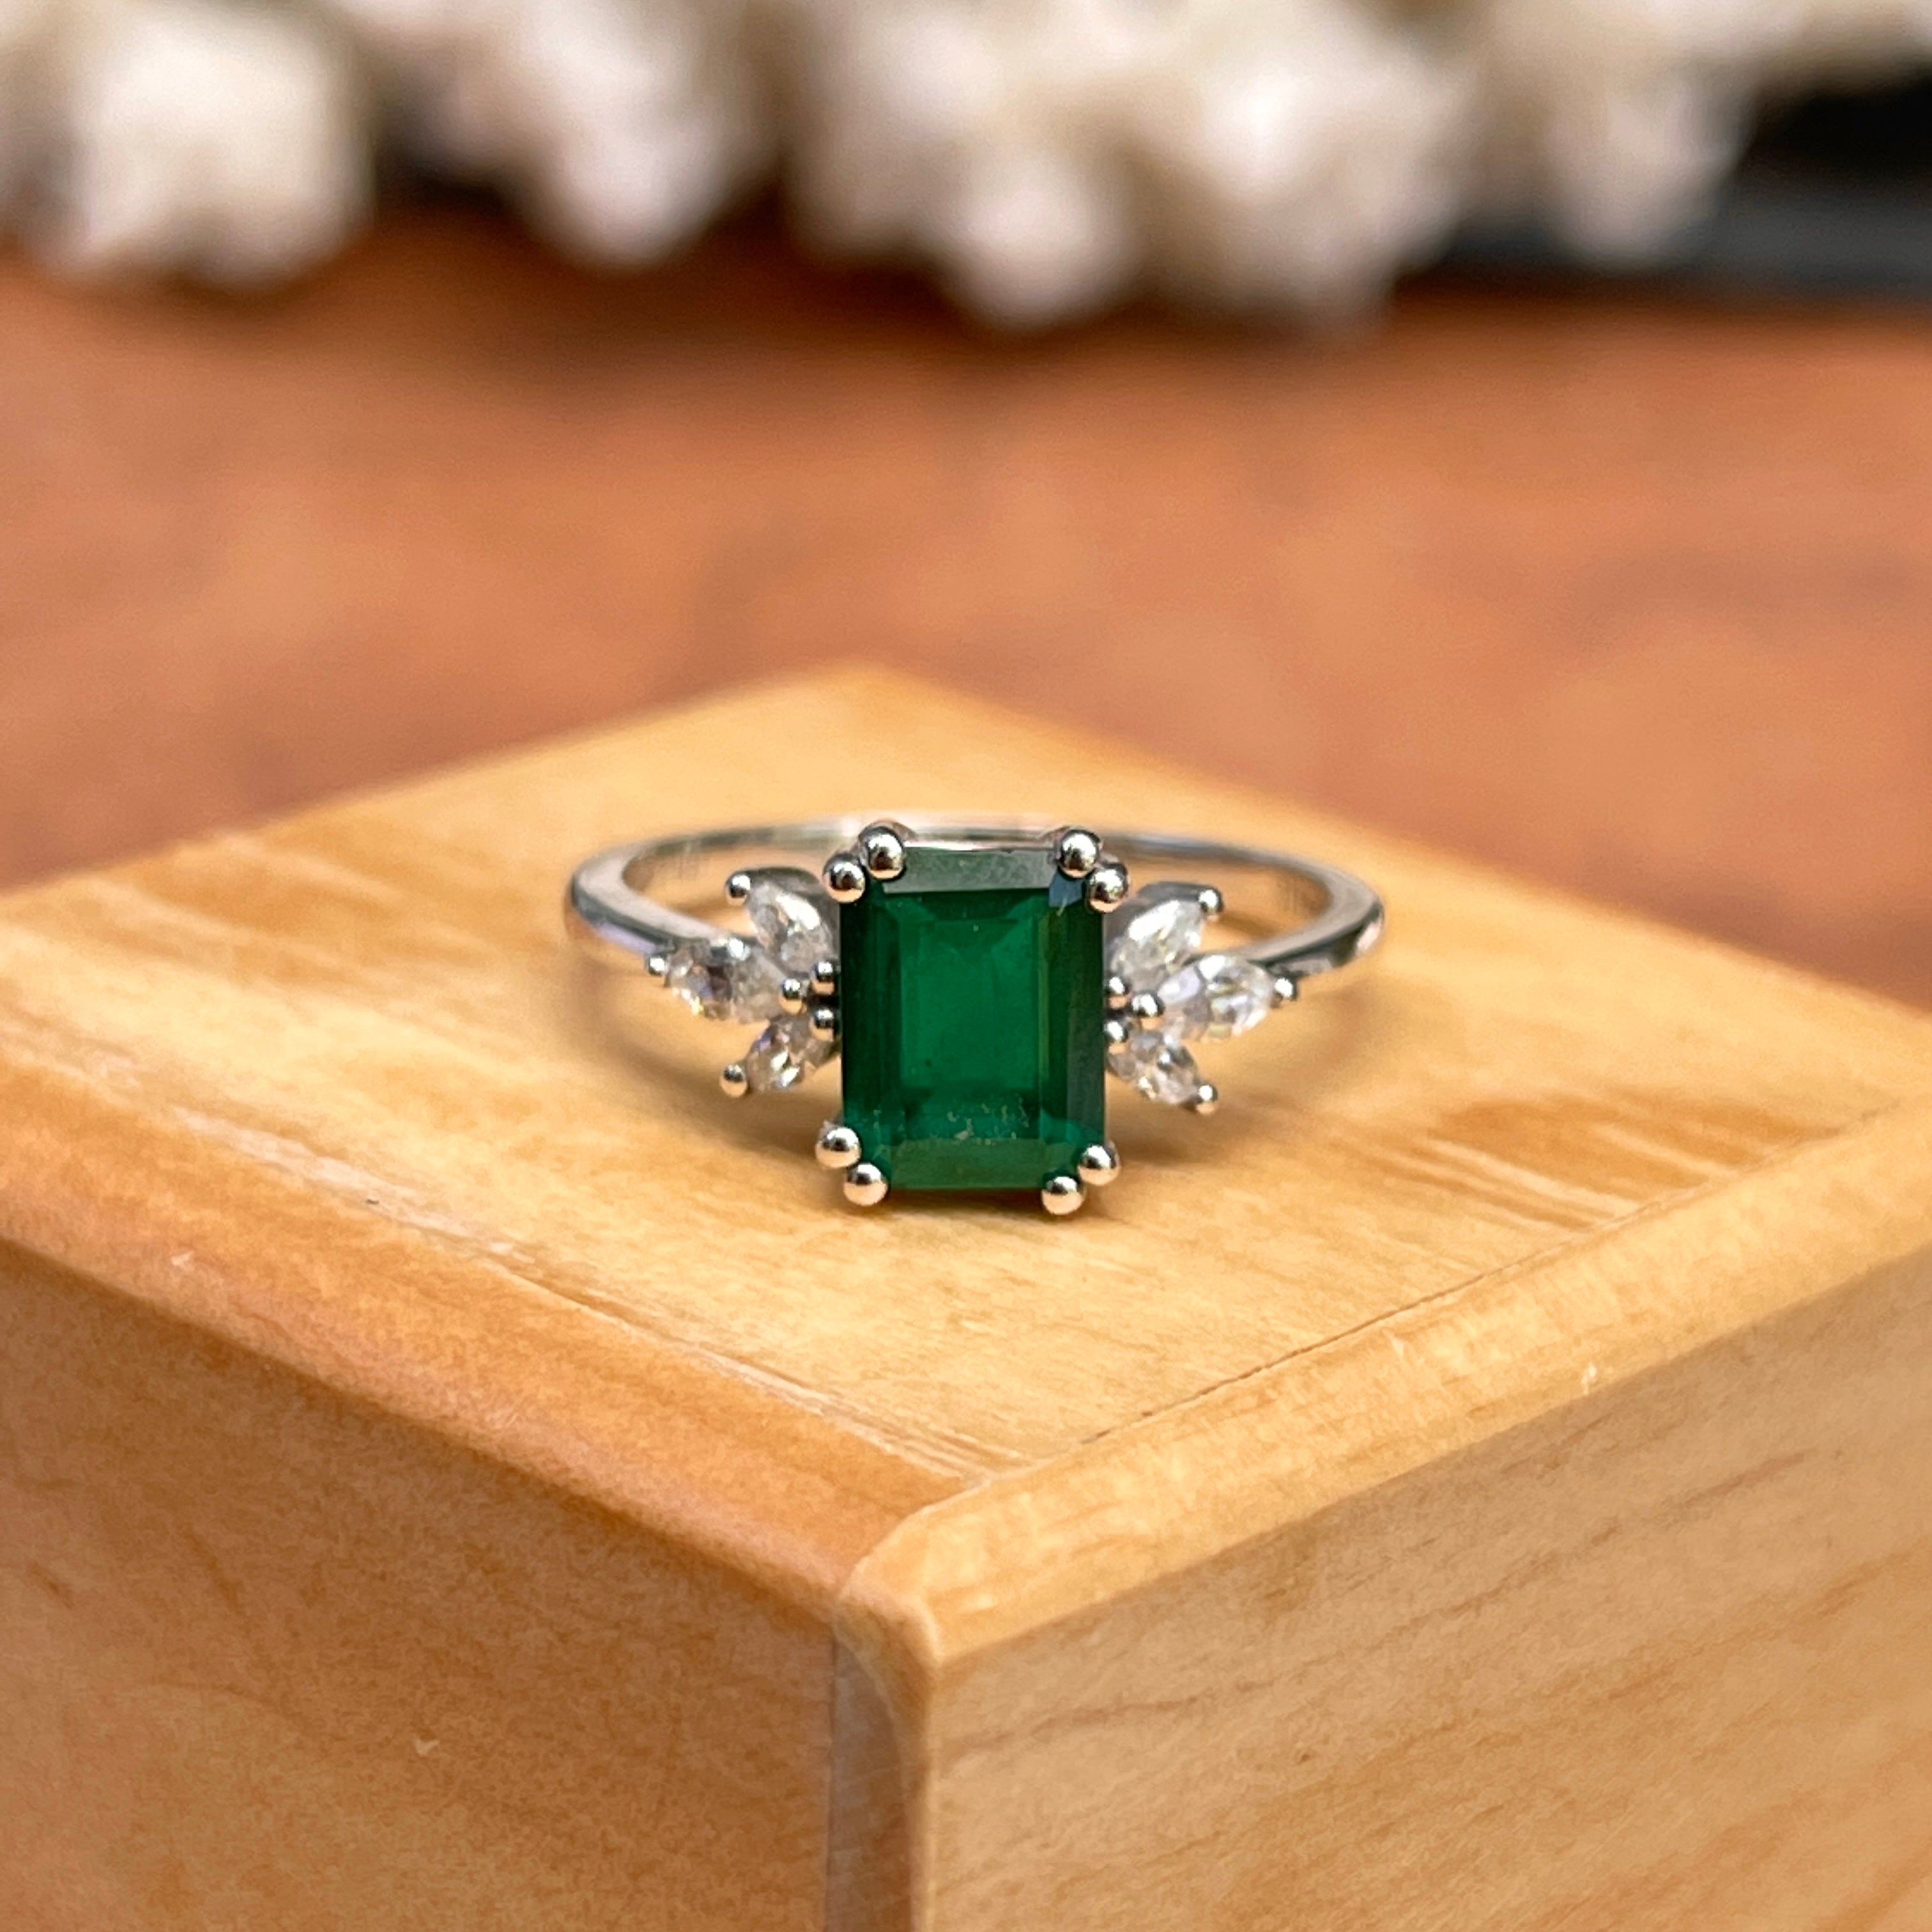 18ct White Gold 2.94ct Emerald cut Emerald & Diamond Ring - Jewellery from  David Mellor Family Jewellers UK